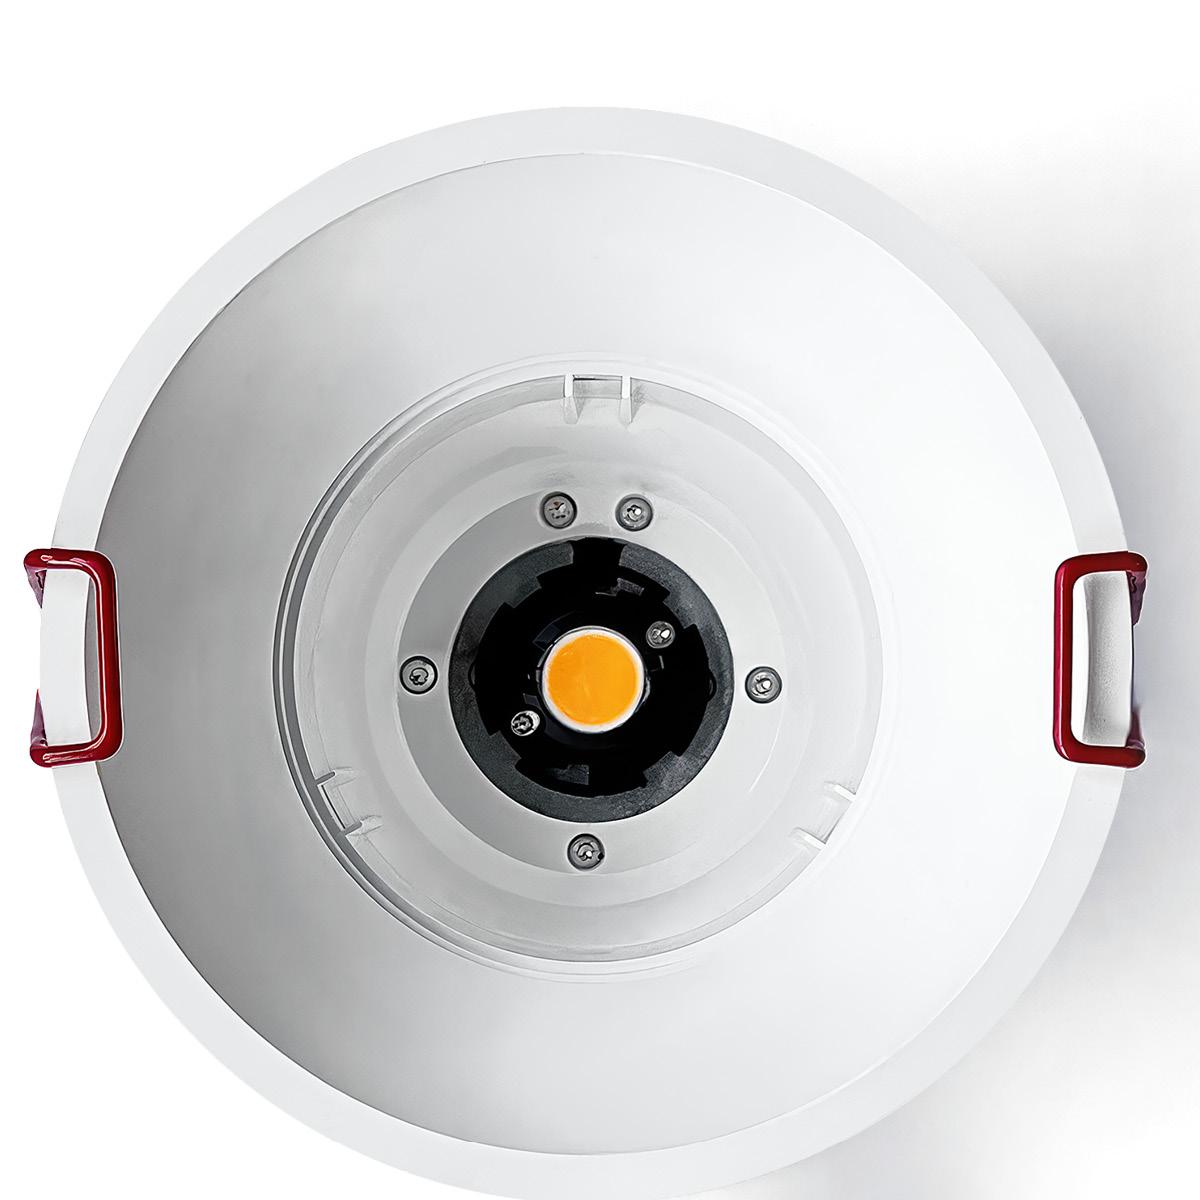 Gallery Product Modoc Downlight Linealightgroup 1200X1200 1